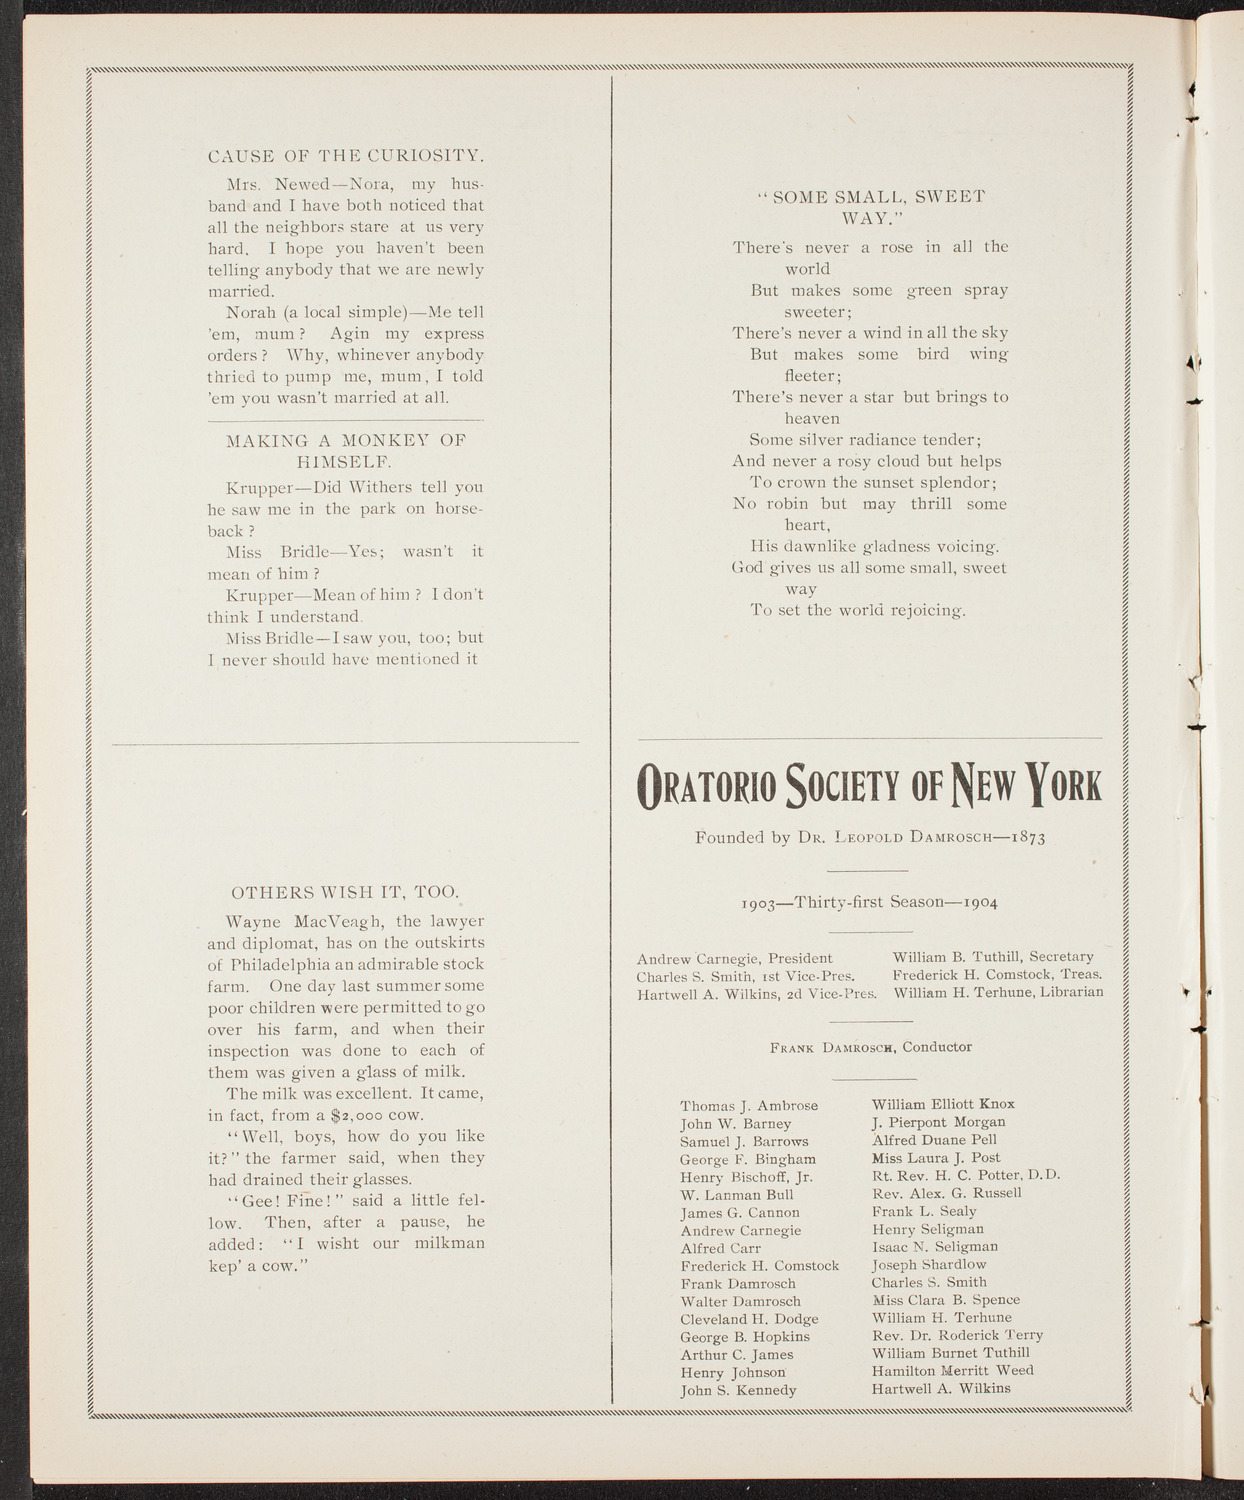 Graduation: Packard Commercial School, May 23, 1904, program page 8